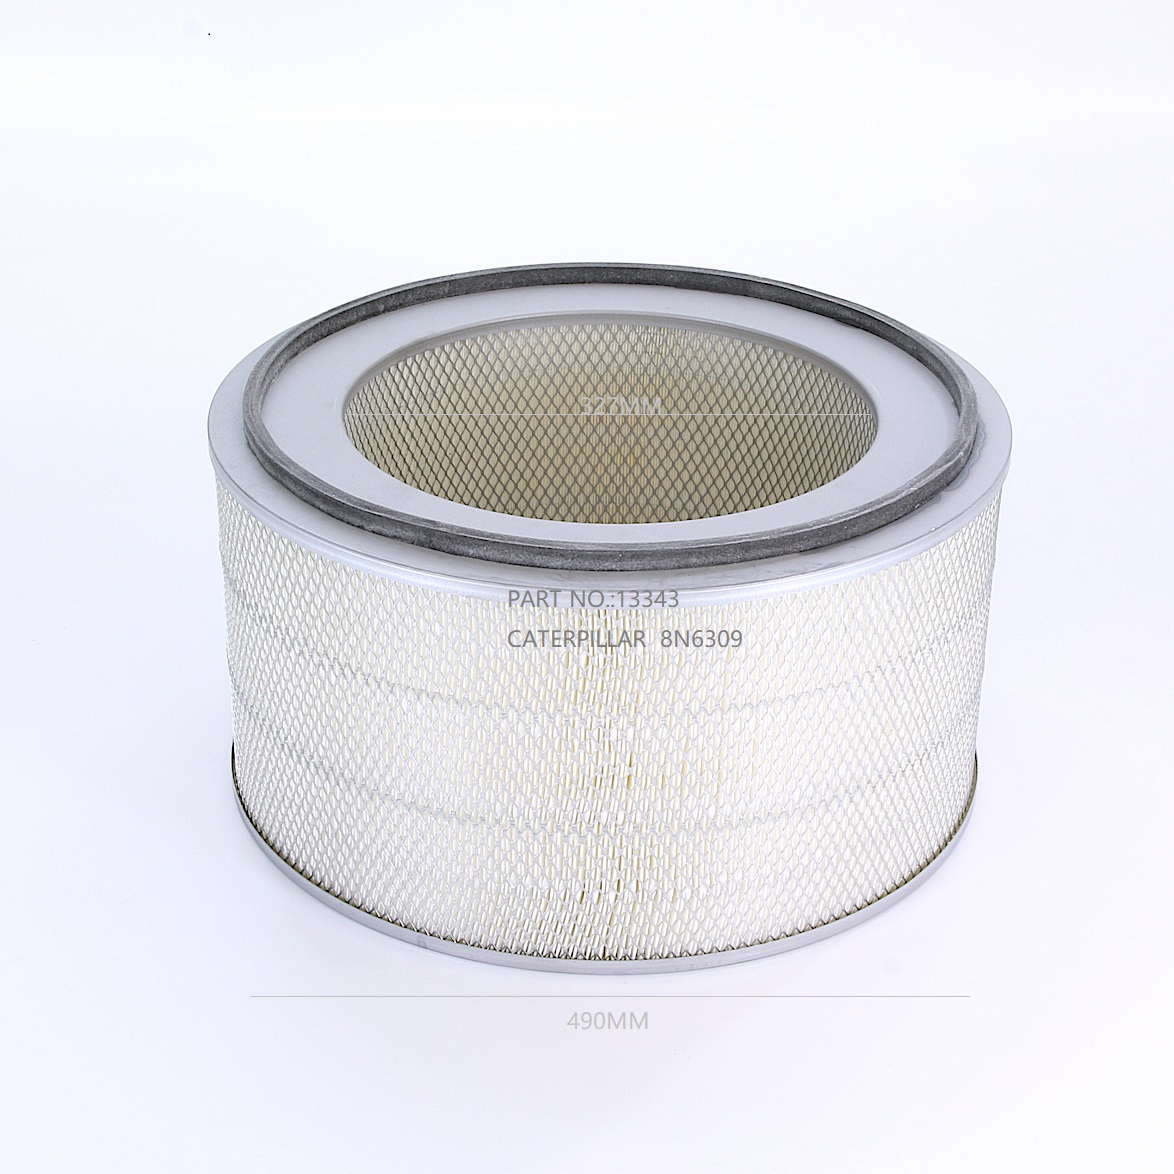 13343 AIR FILTER FOR Caterpillar Industrial Engines